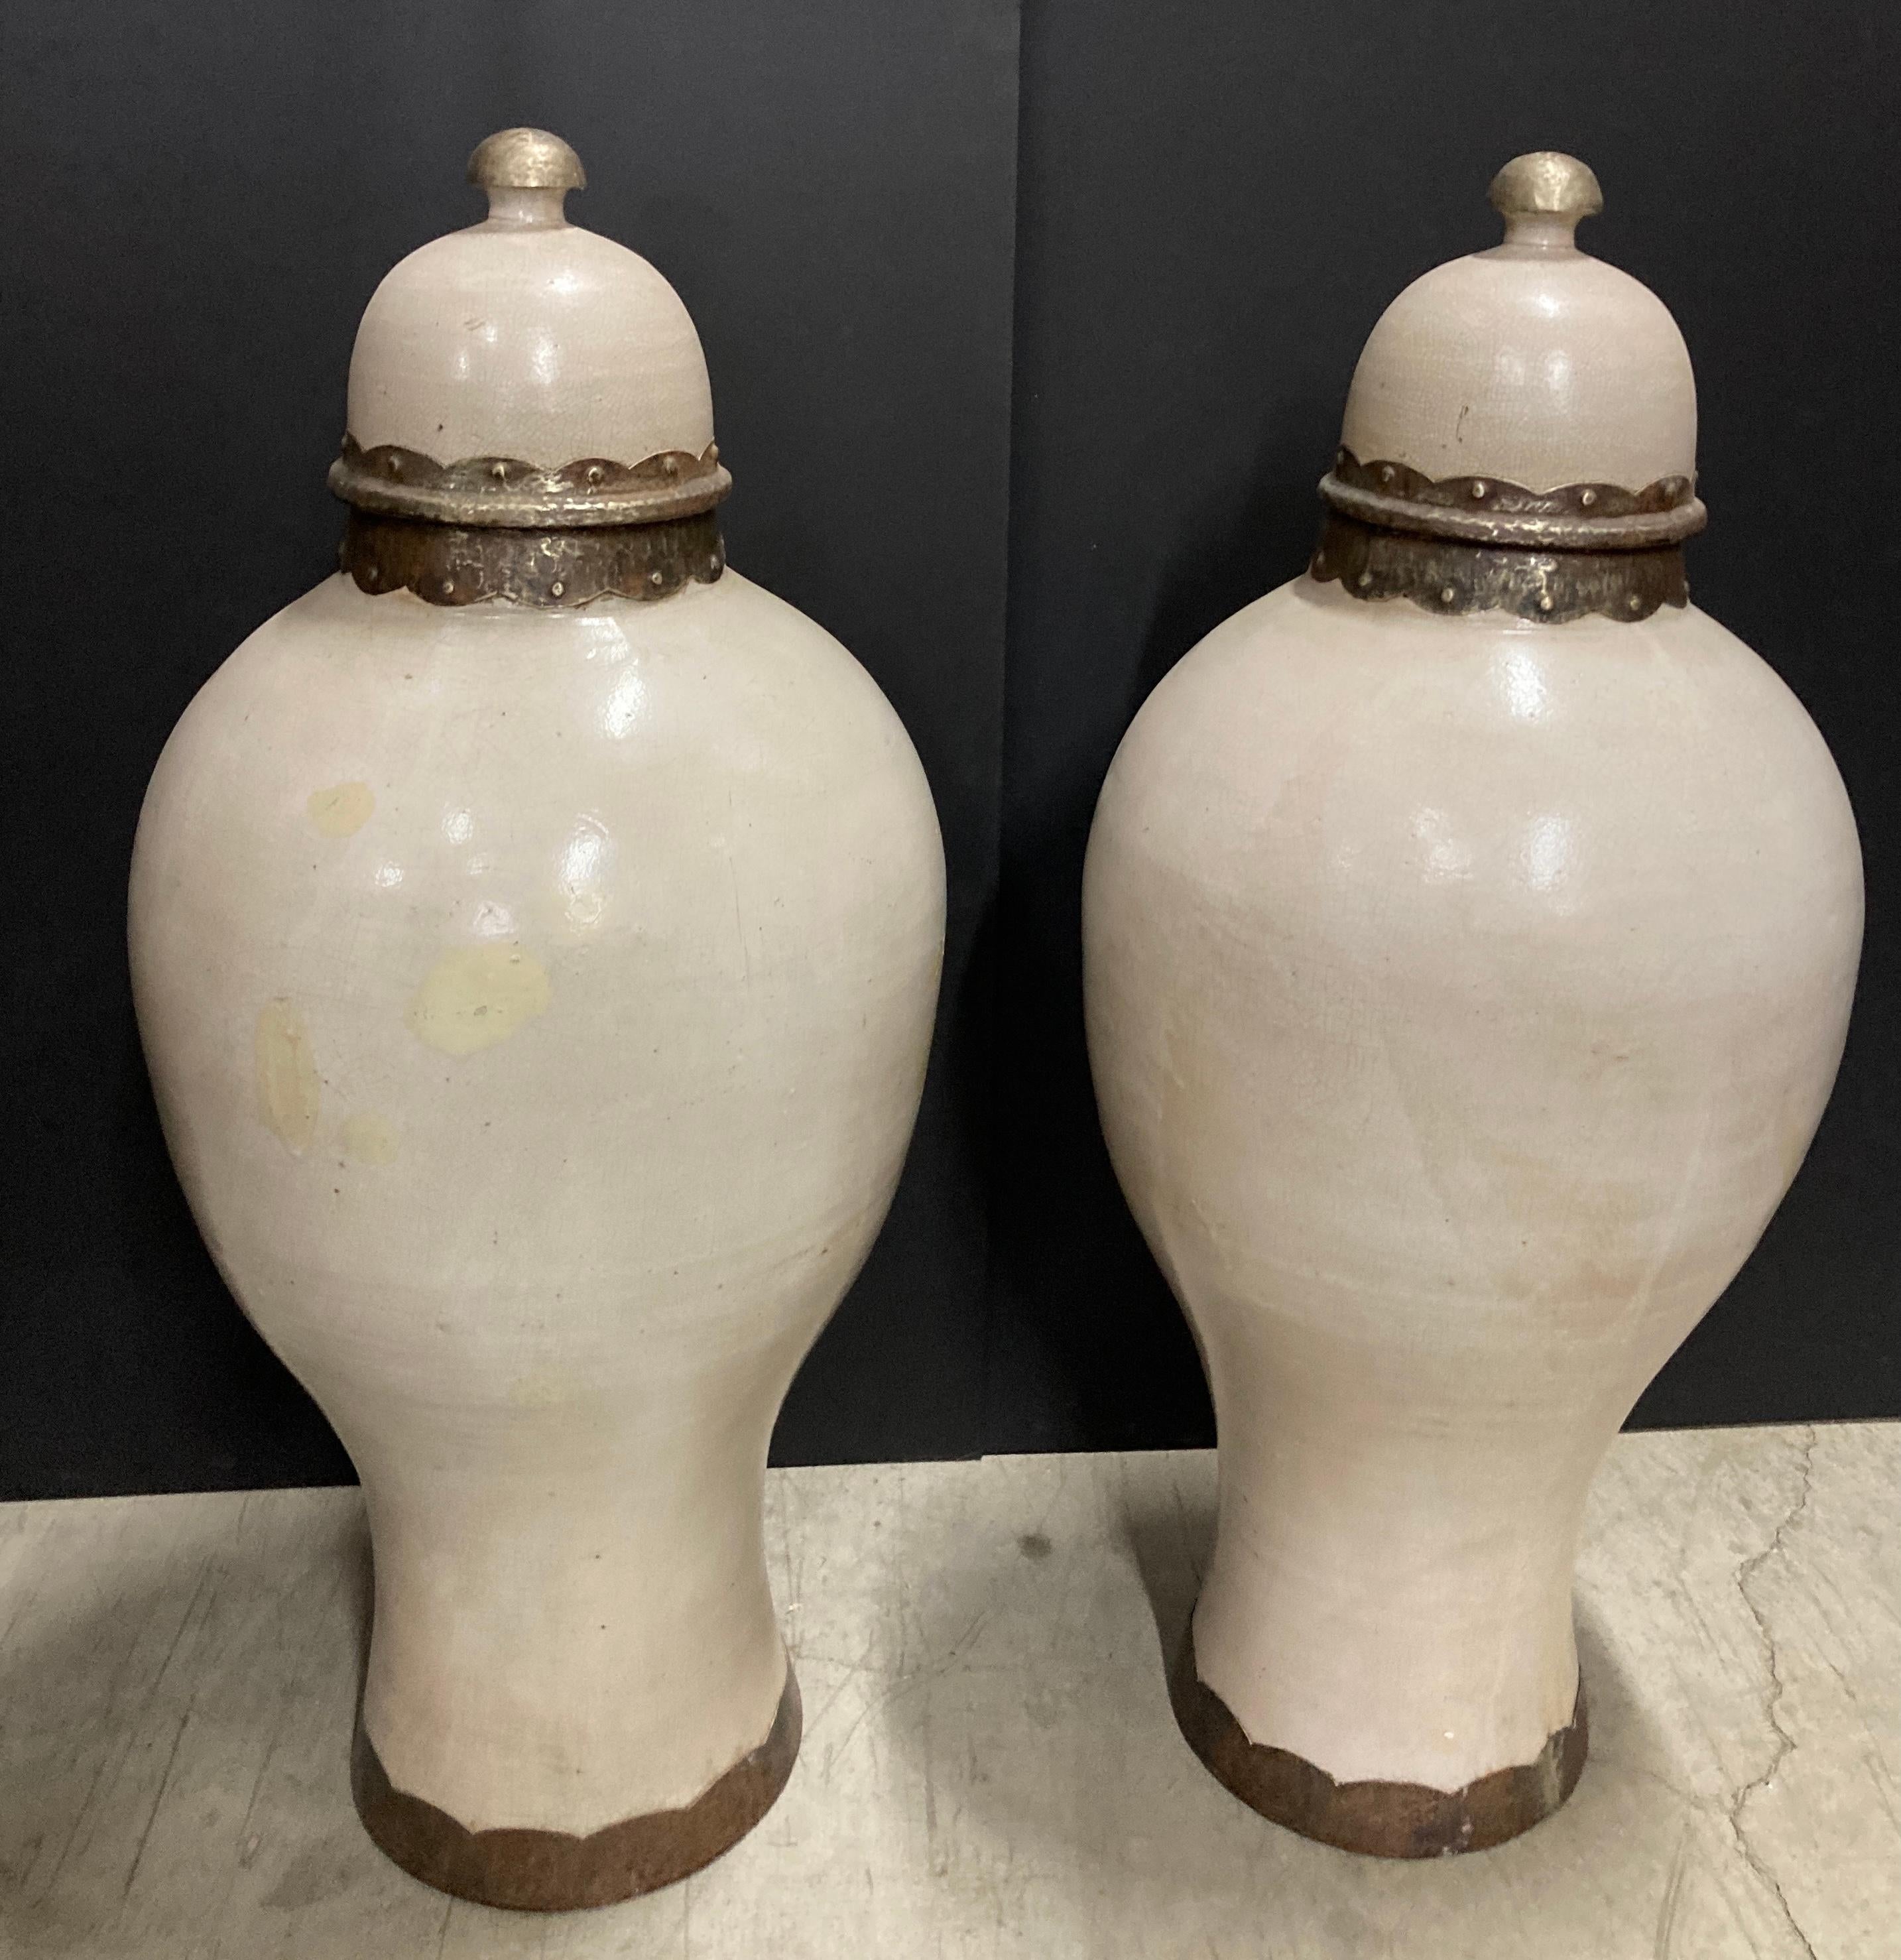 Hand-Crafted Pair of Moroccan Moorish Olive Jars with Lid from Fez, Ivory Color